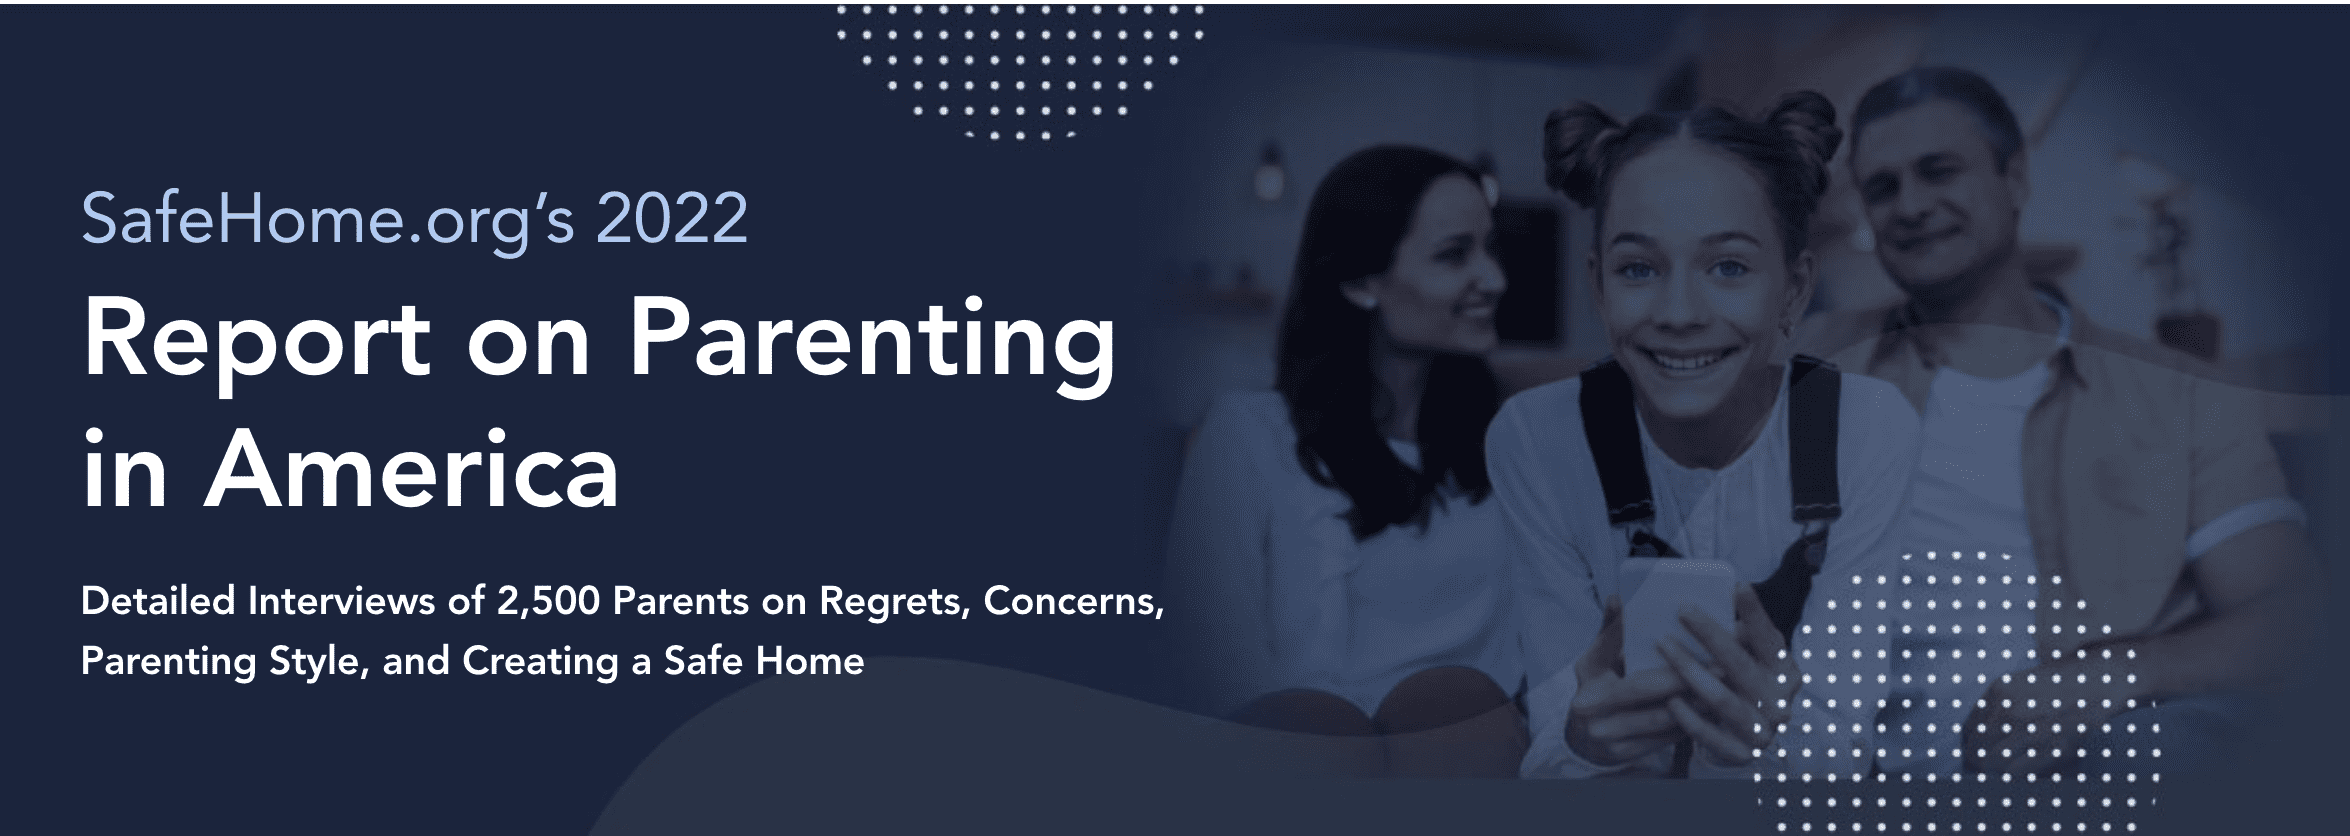 Report on Parenting in America Featured Image